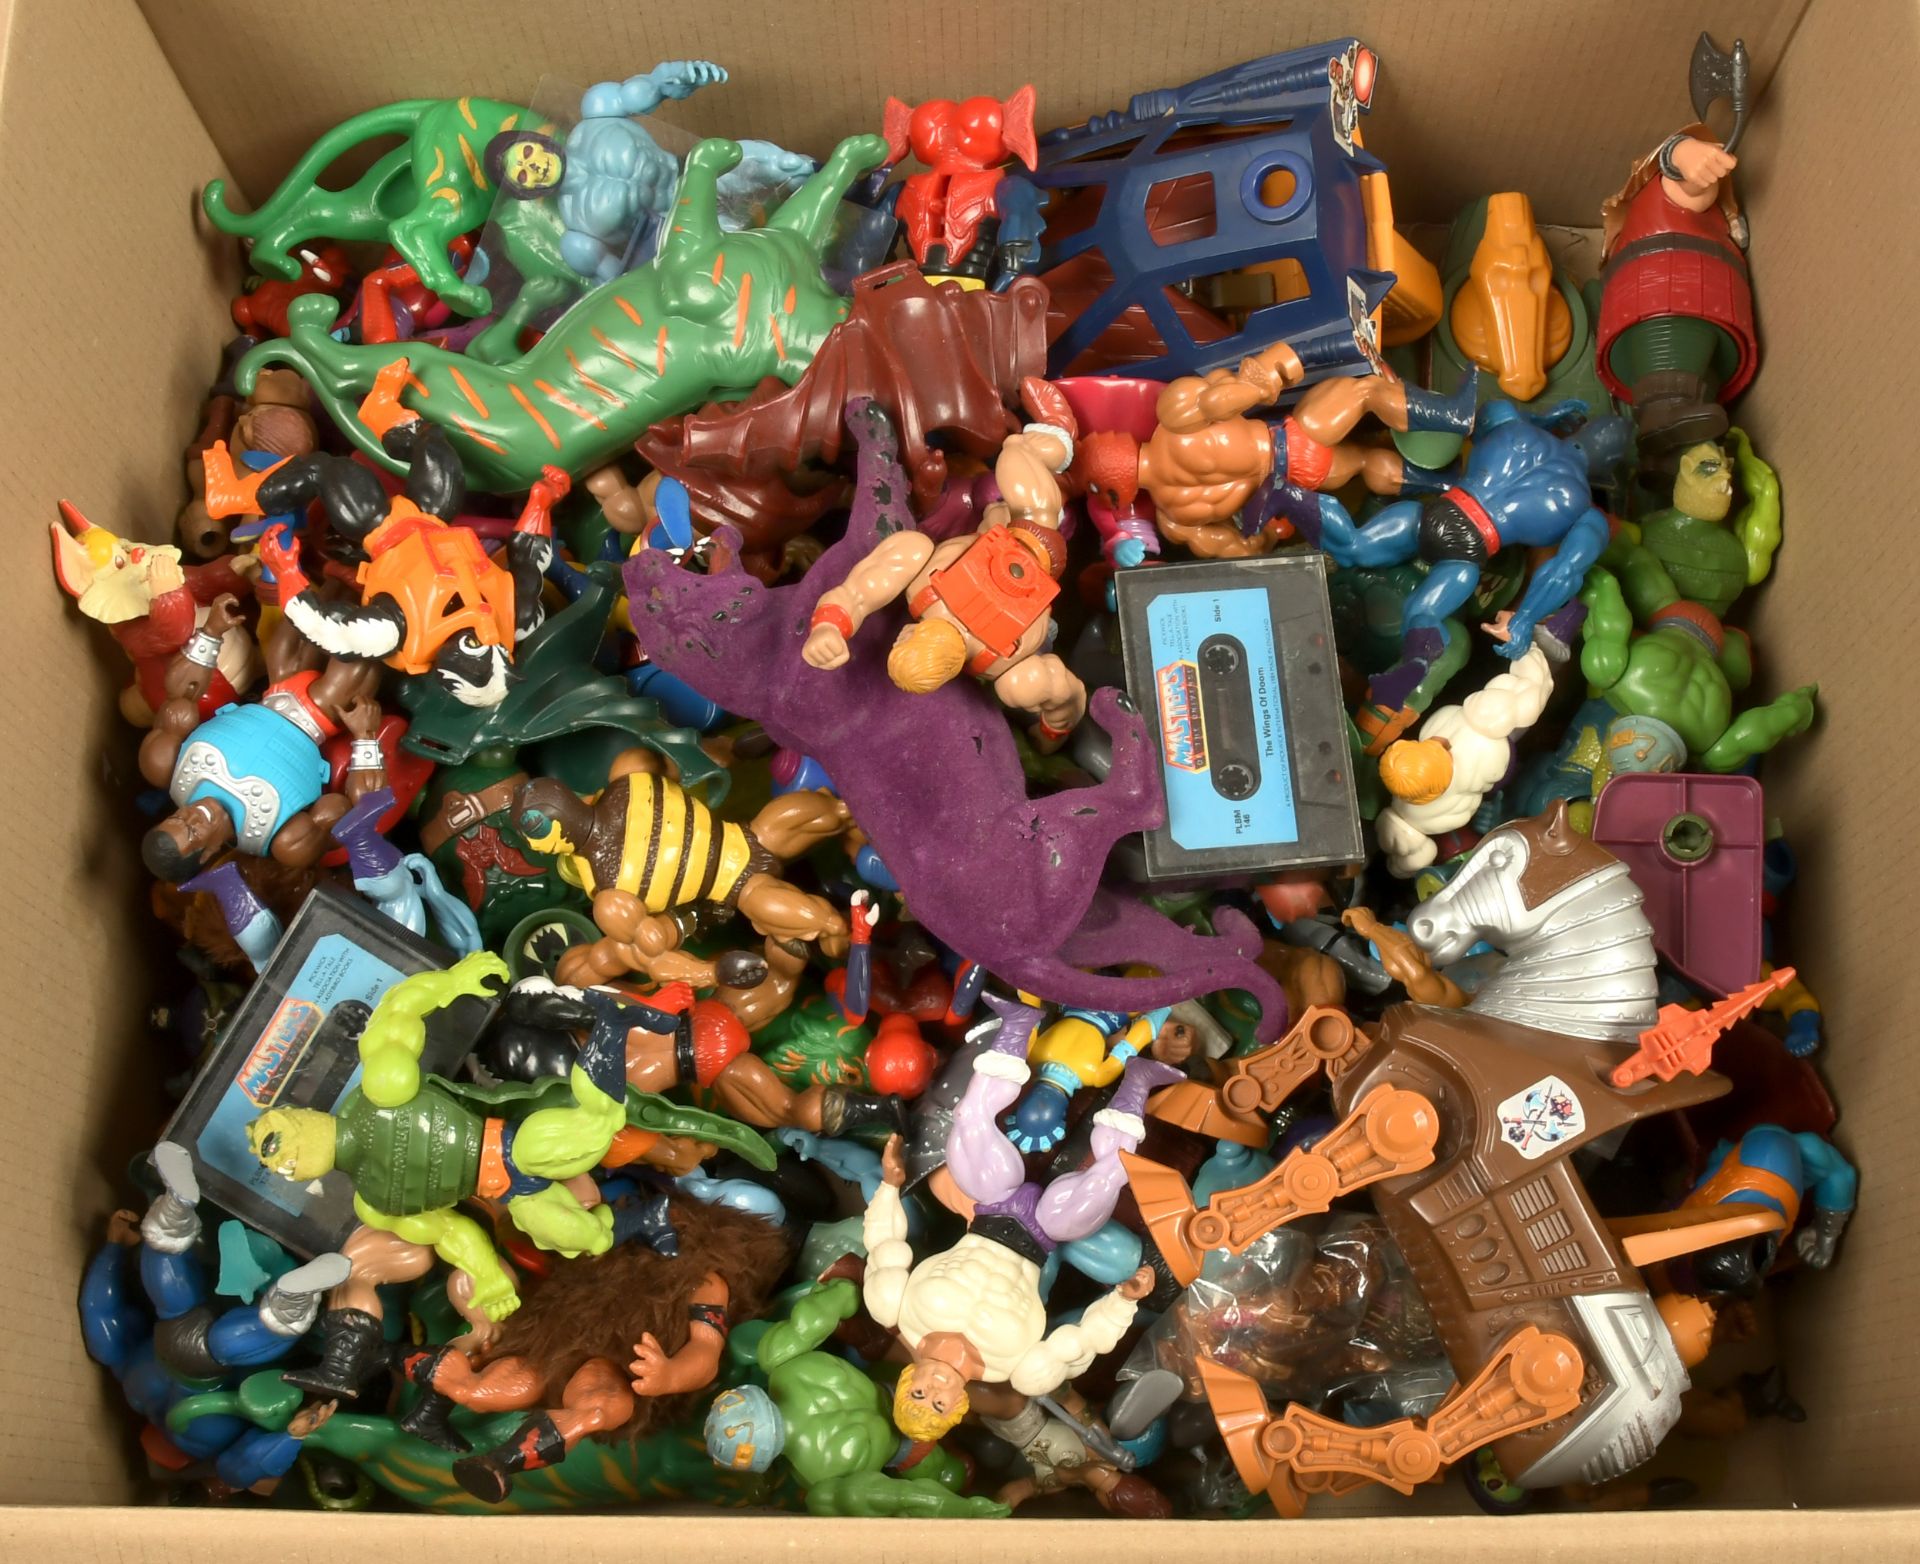 Quantity of loose Masters of the Universe Action Figures